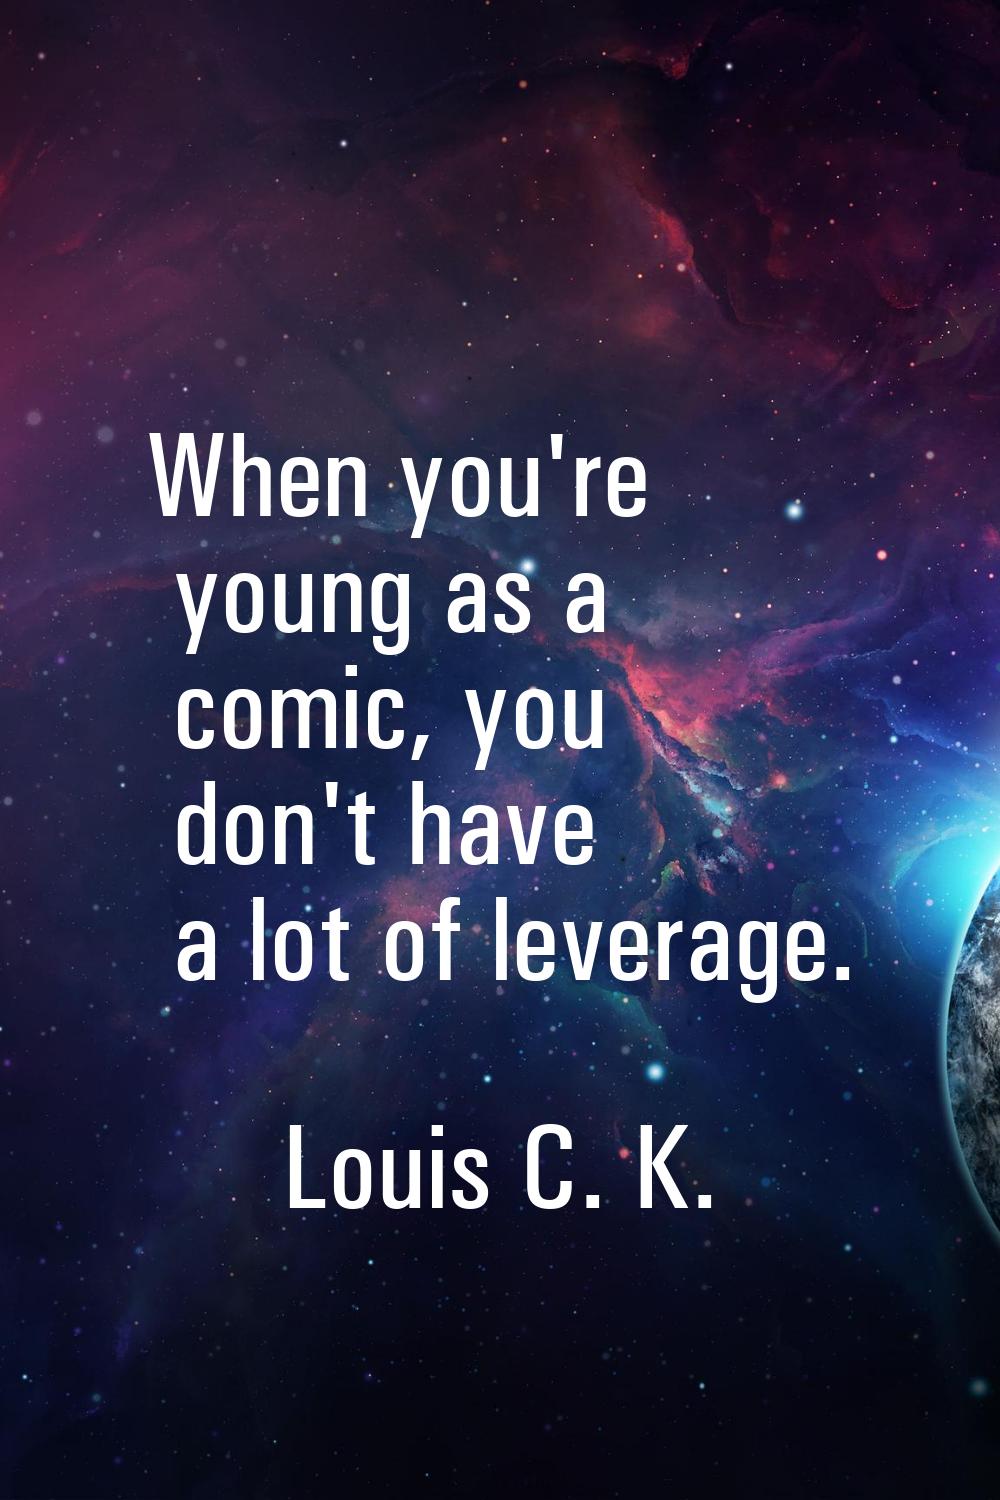 When you're young as a comic, you don't have a lot of leverage.